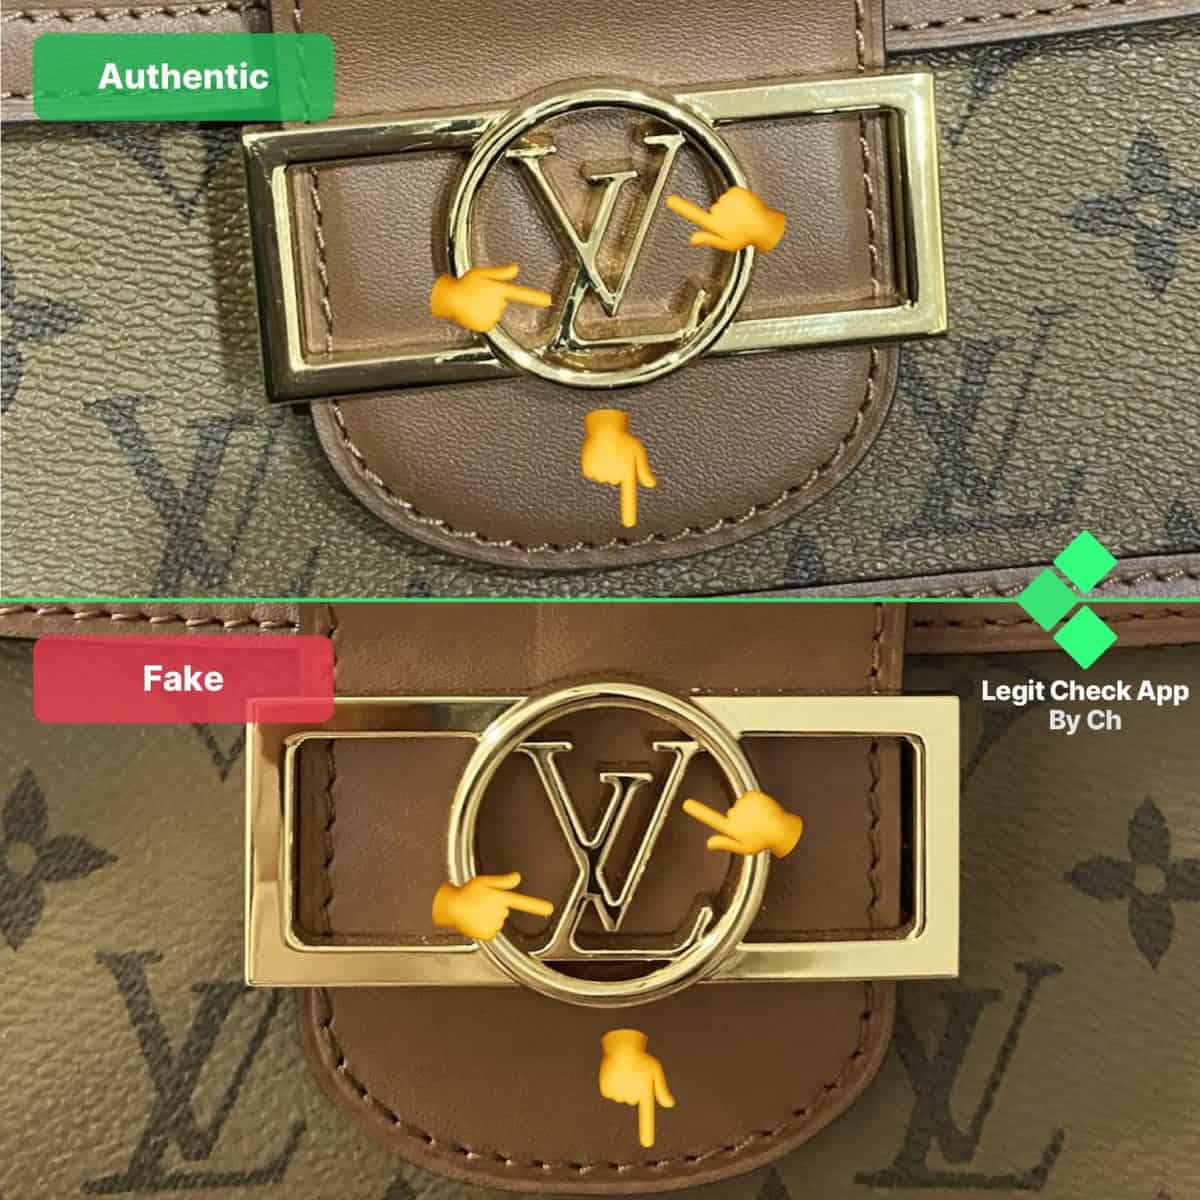 Louis Vuitton Dauphine: How To Spot Fake Bags